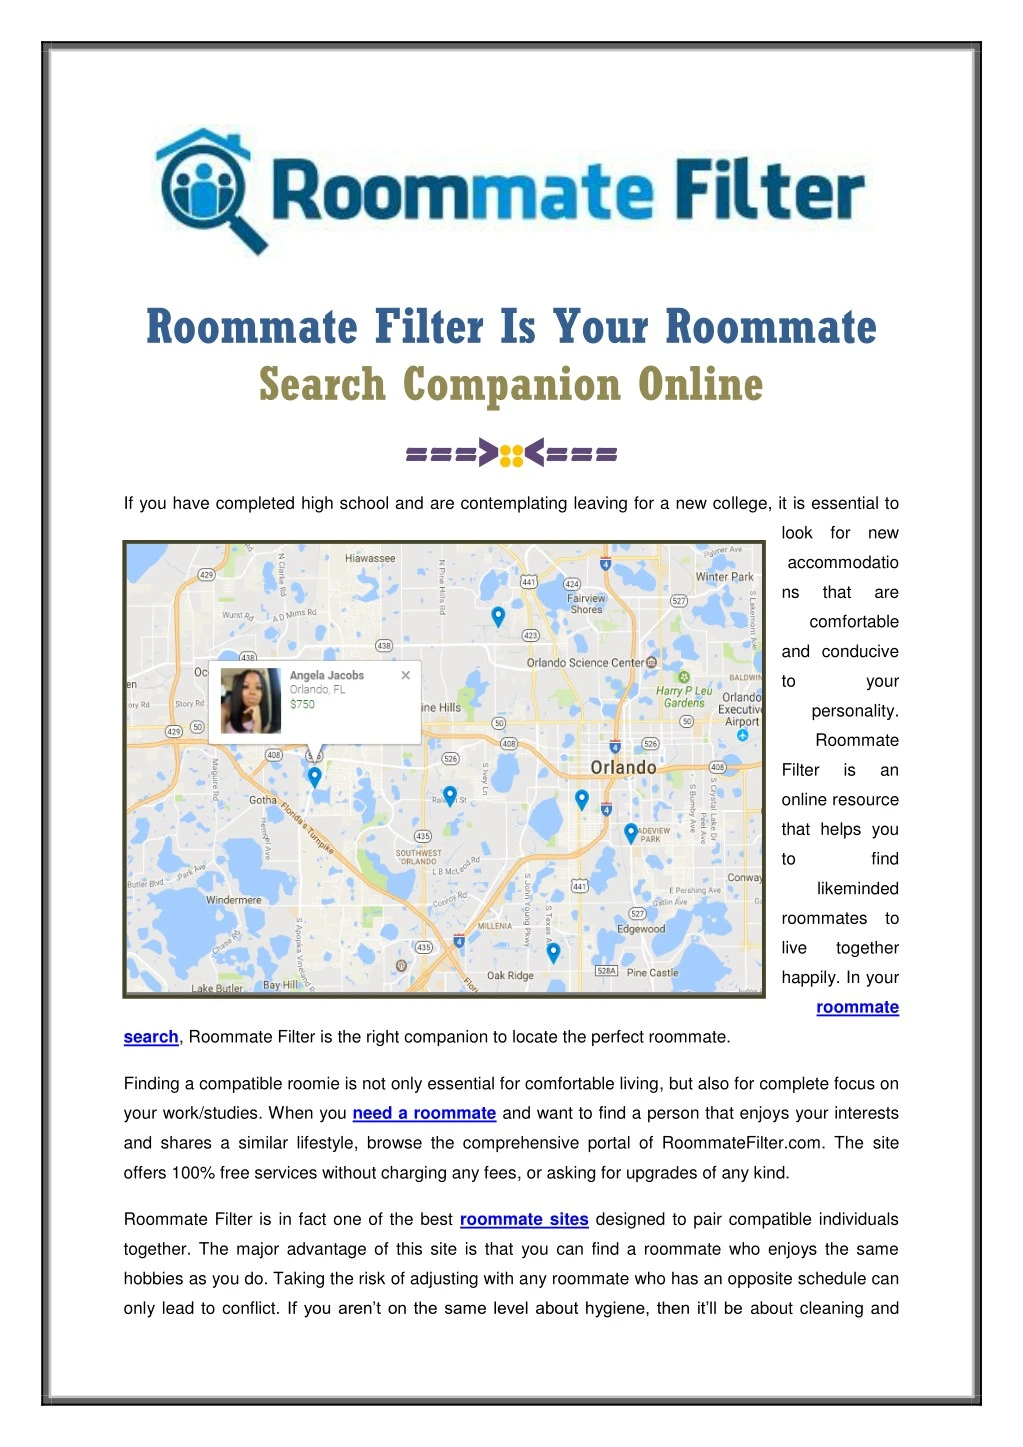 roommate filter is your roommate search companion